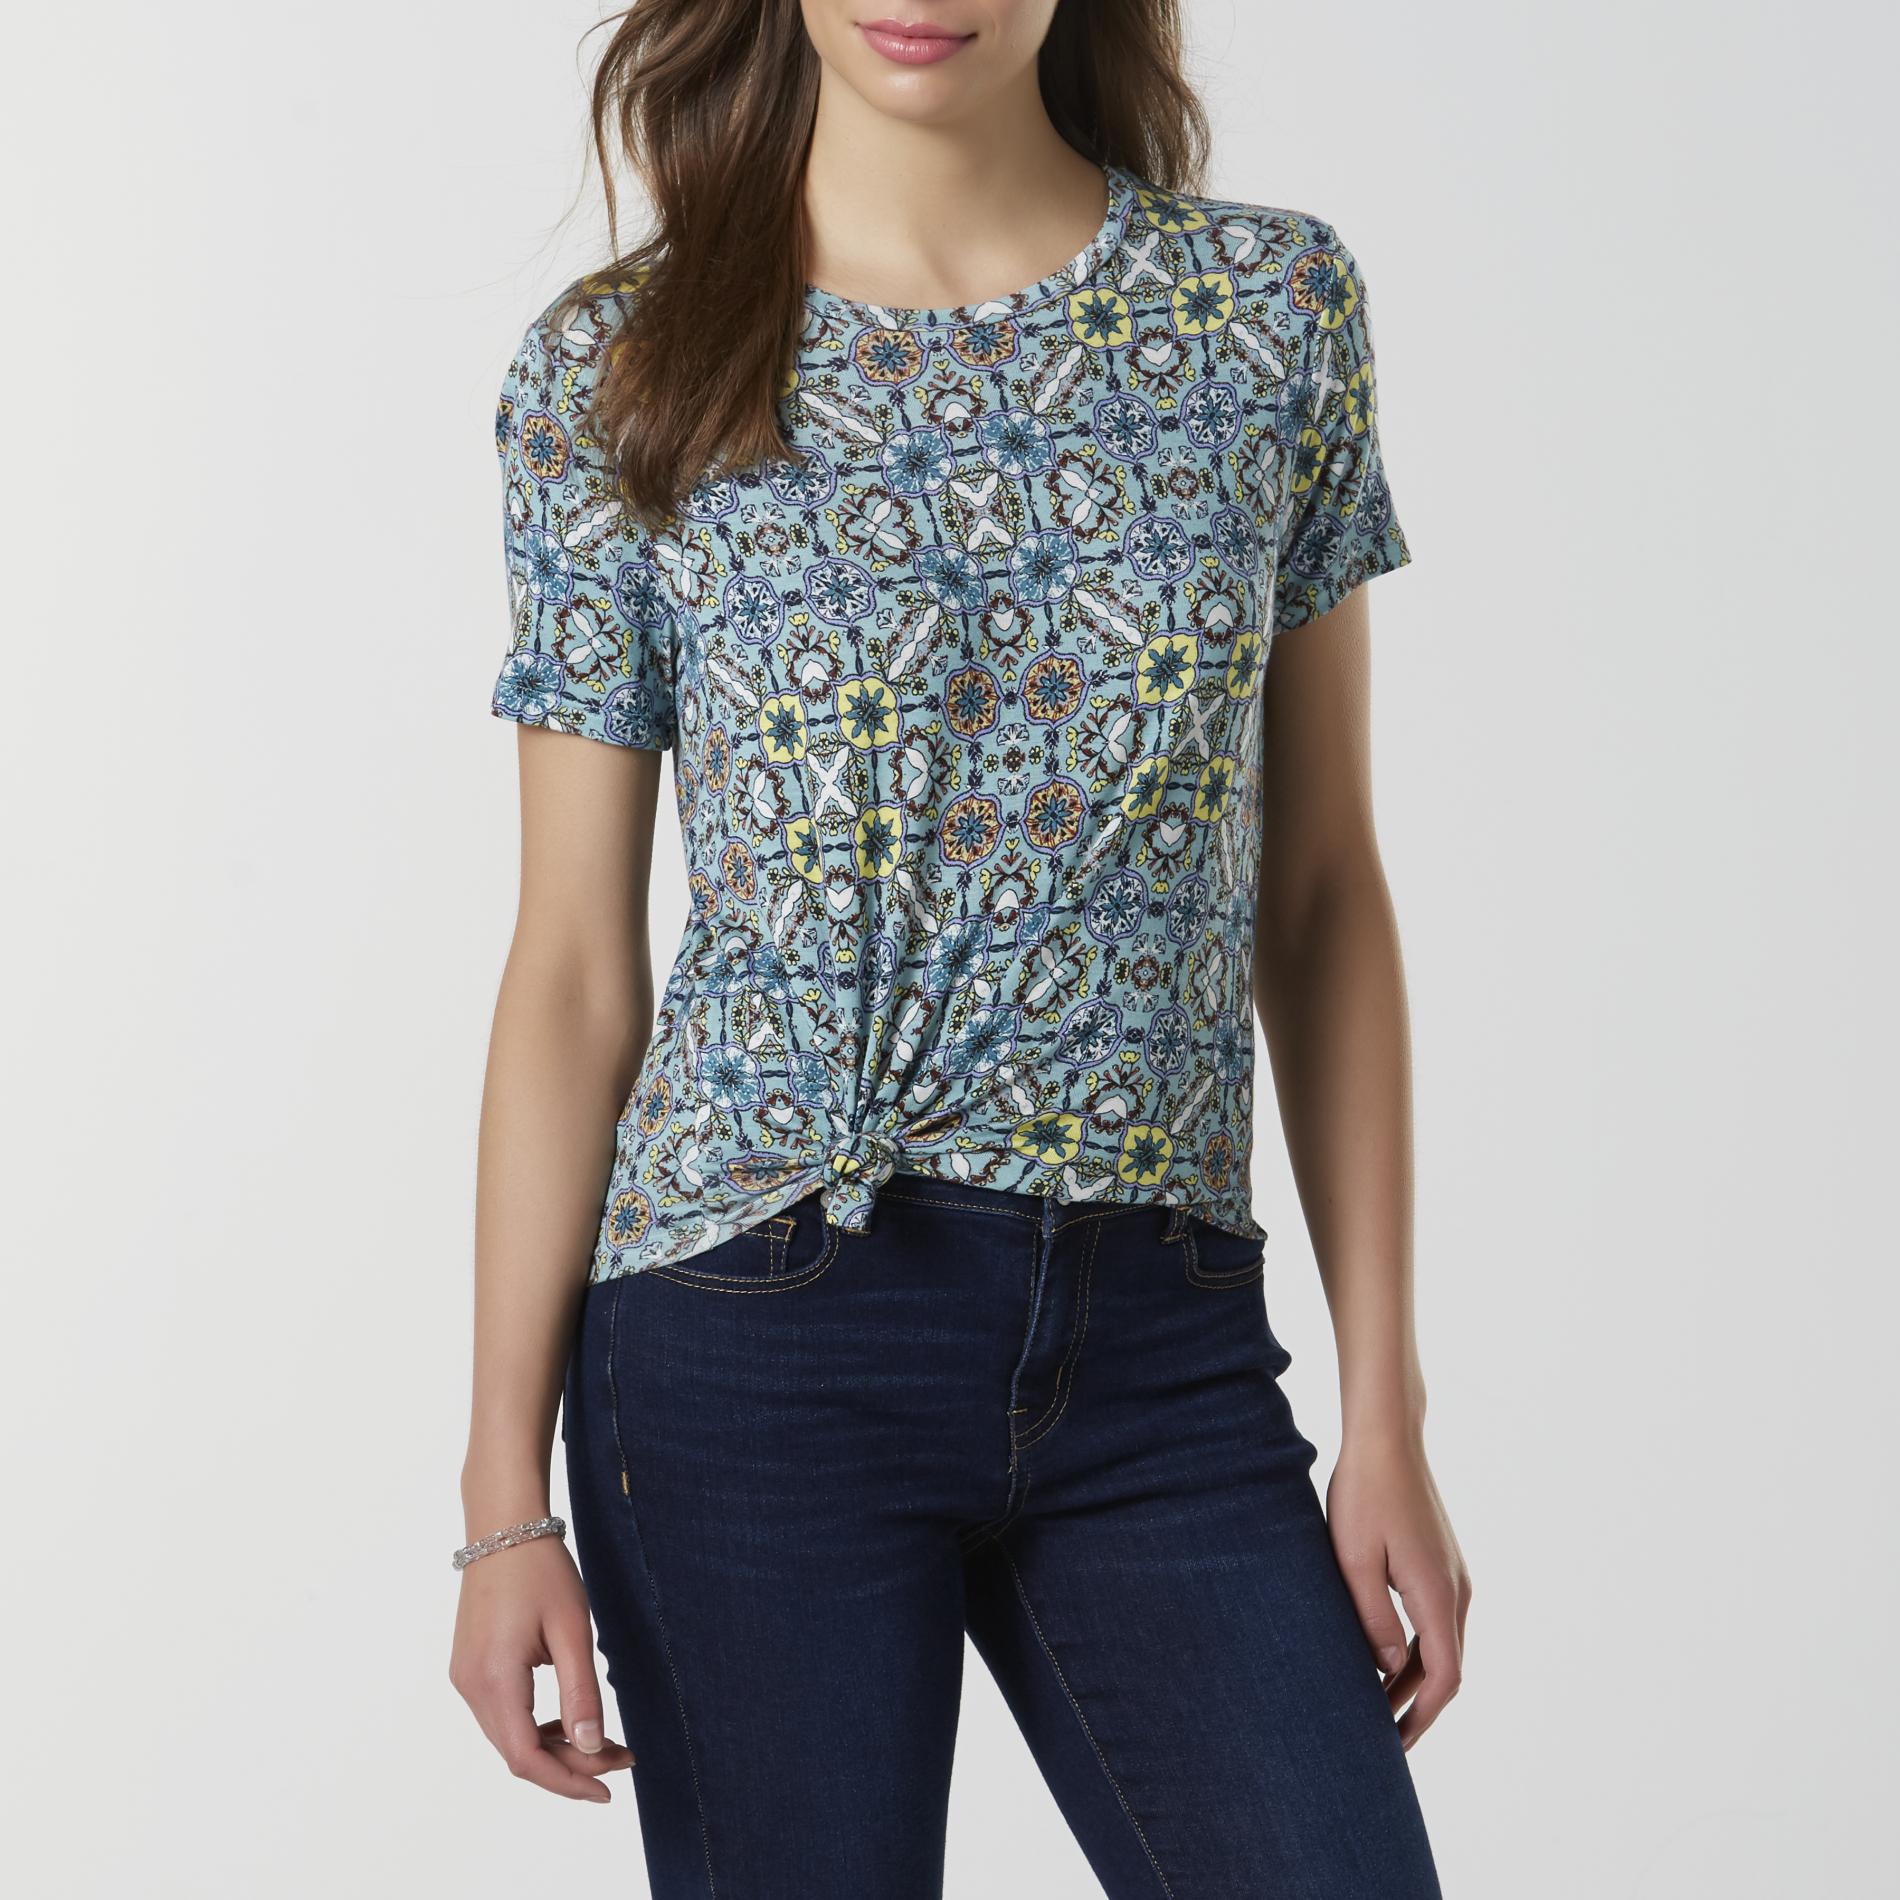 Simply Styled Women's Scoop Neck T-Shirt - Abstract